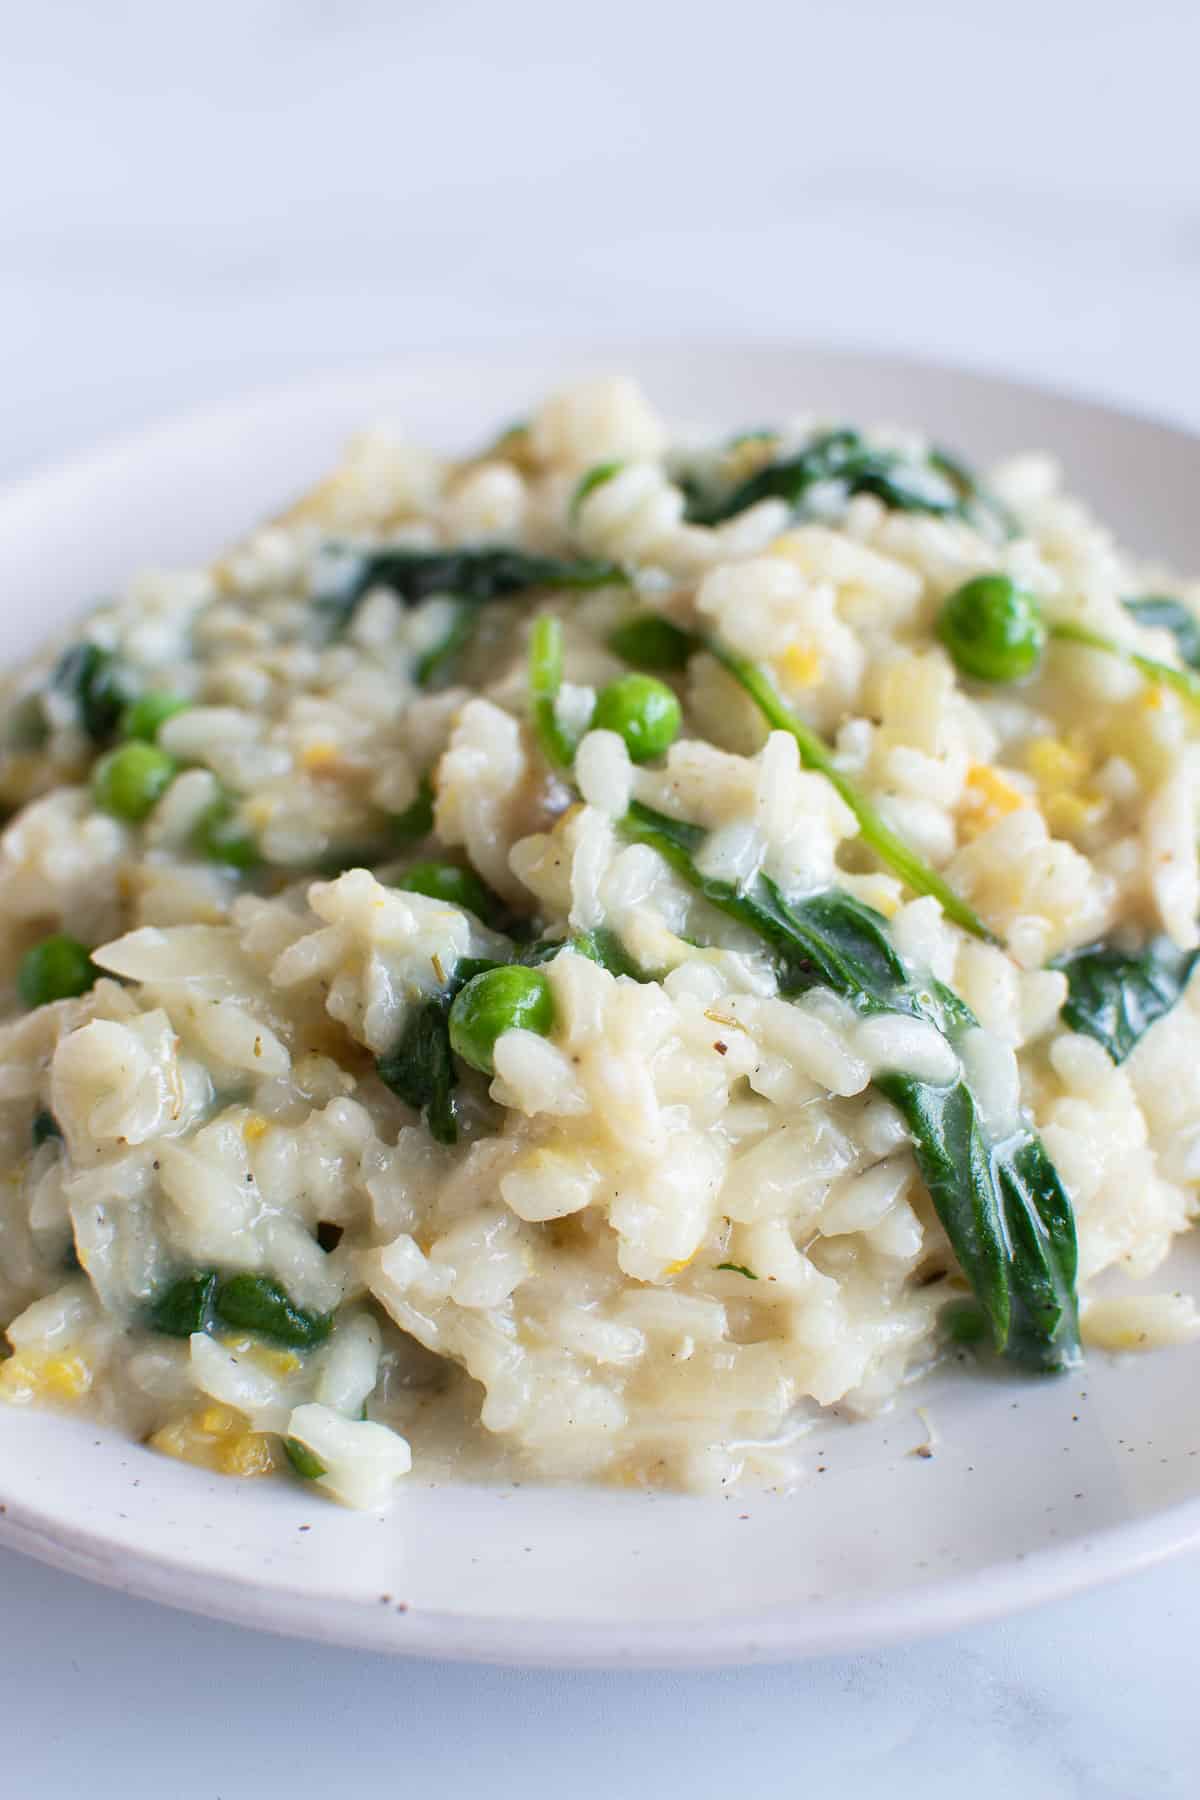 Smoked haddock risotto with peas and spinach.